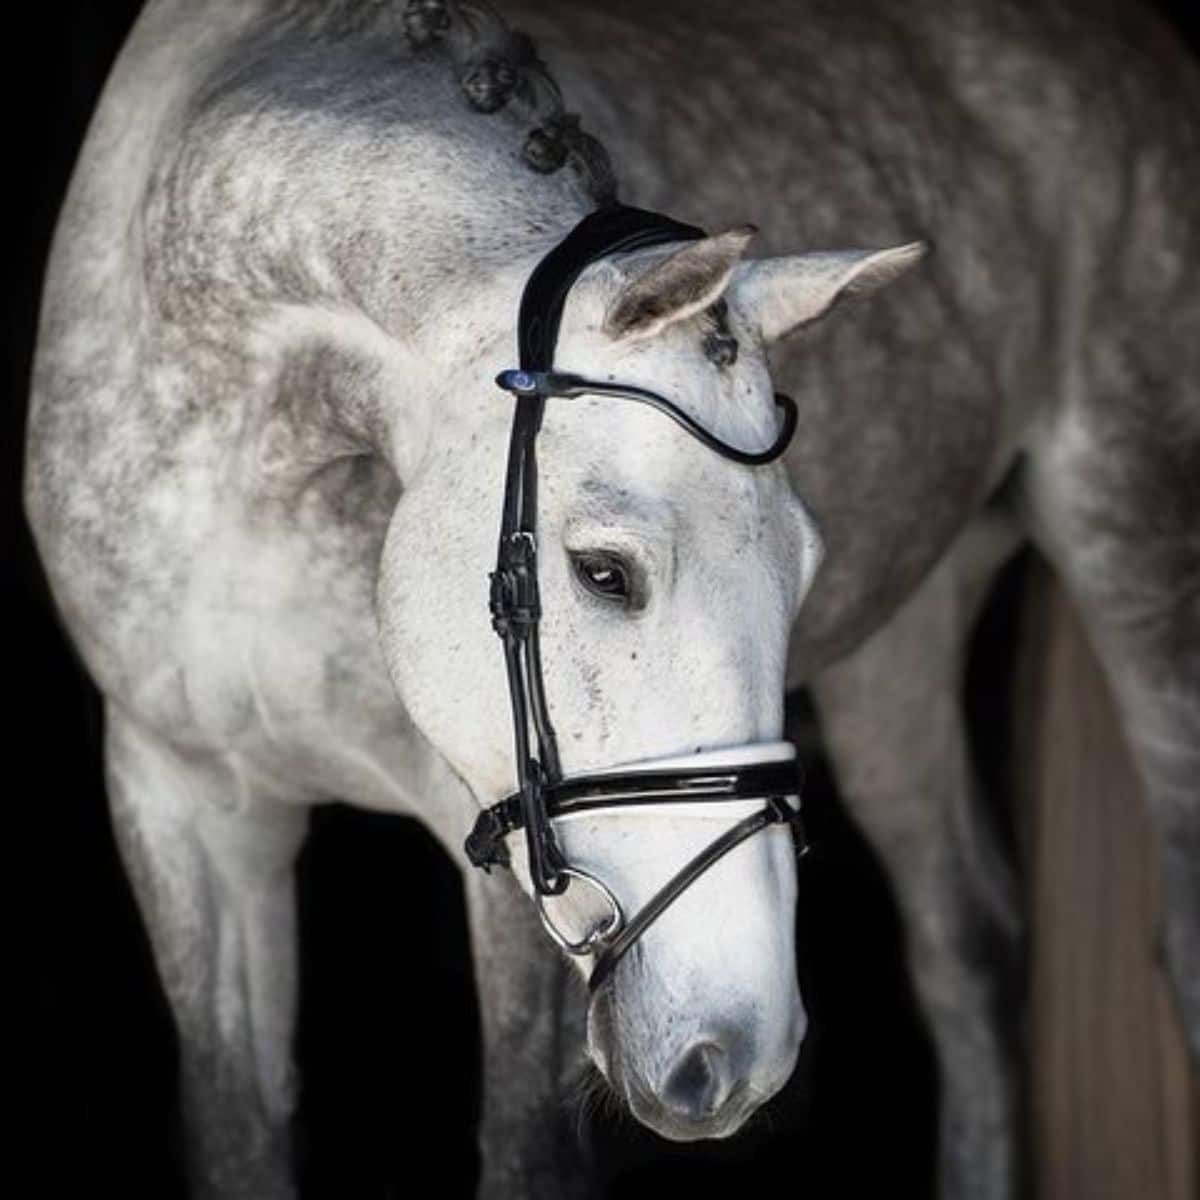 A gray horse with black patches in a barn.